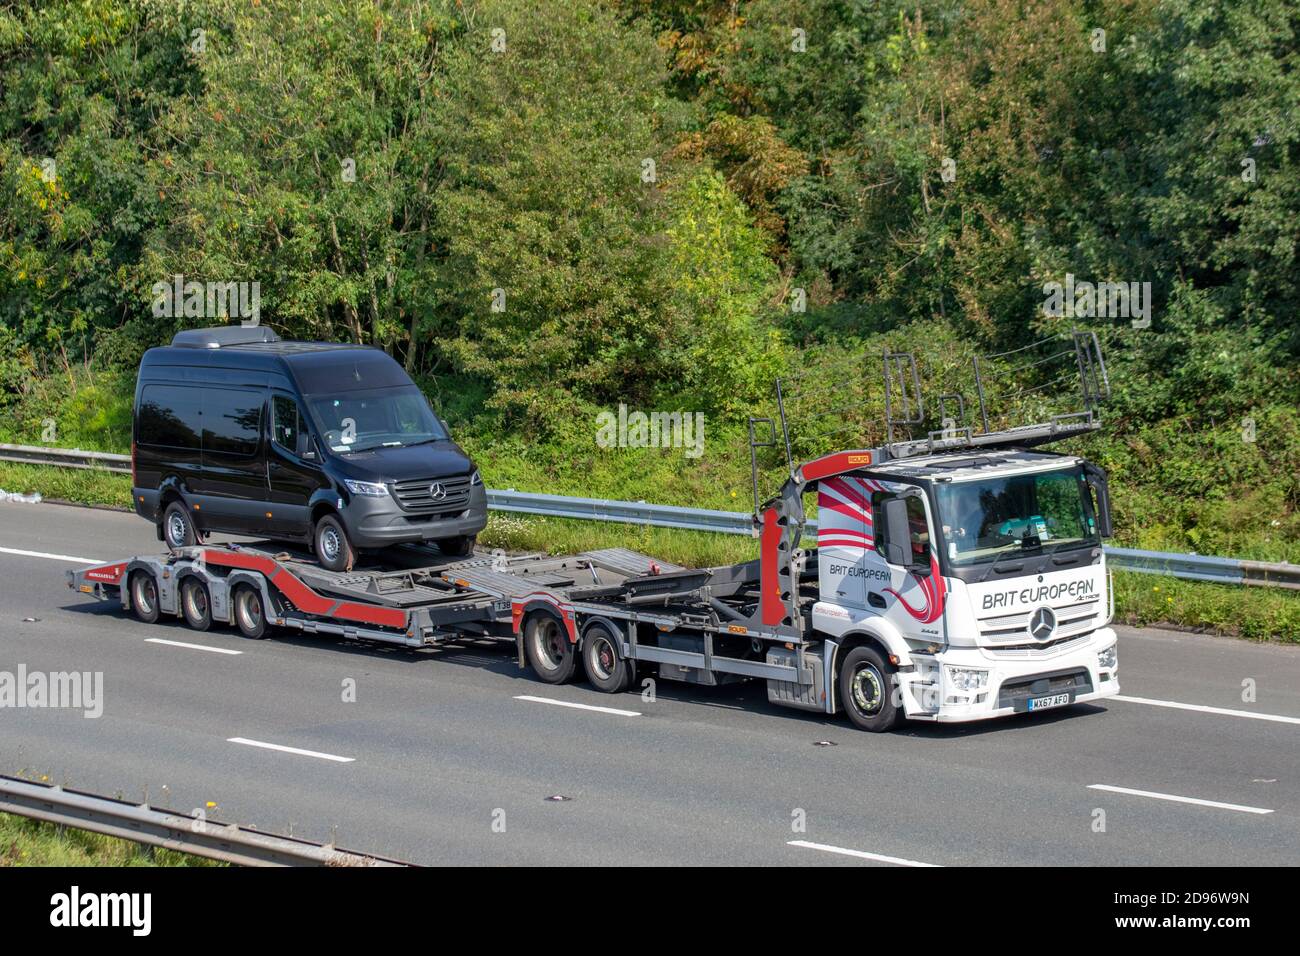 Brit Europeran Auto transporter, car transporter carrier; Motorway heavy bulk Haulage delivery trucks, haulage, Mercedes Benz Actros lorry, transportation, collection and deliveries, Rolfo multi-car commercial vehicle carrier, truck, special cargo, vehicle, delivery, transport, industry, freight on the M6 motorway. Stock Photo